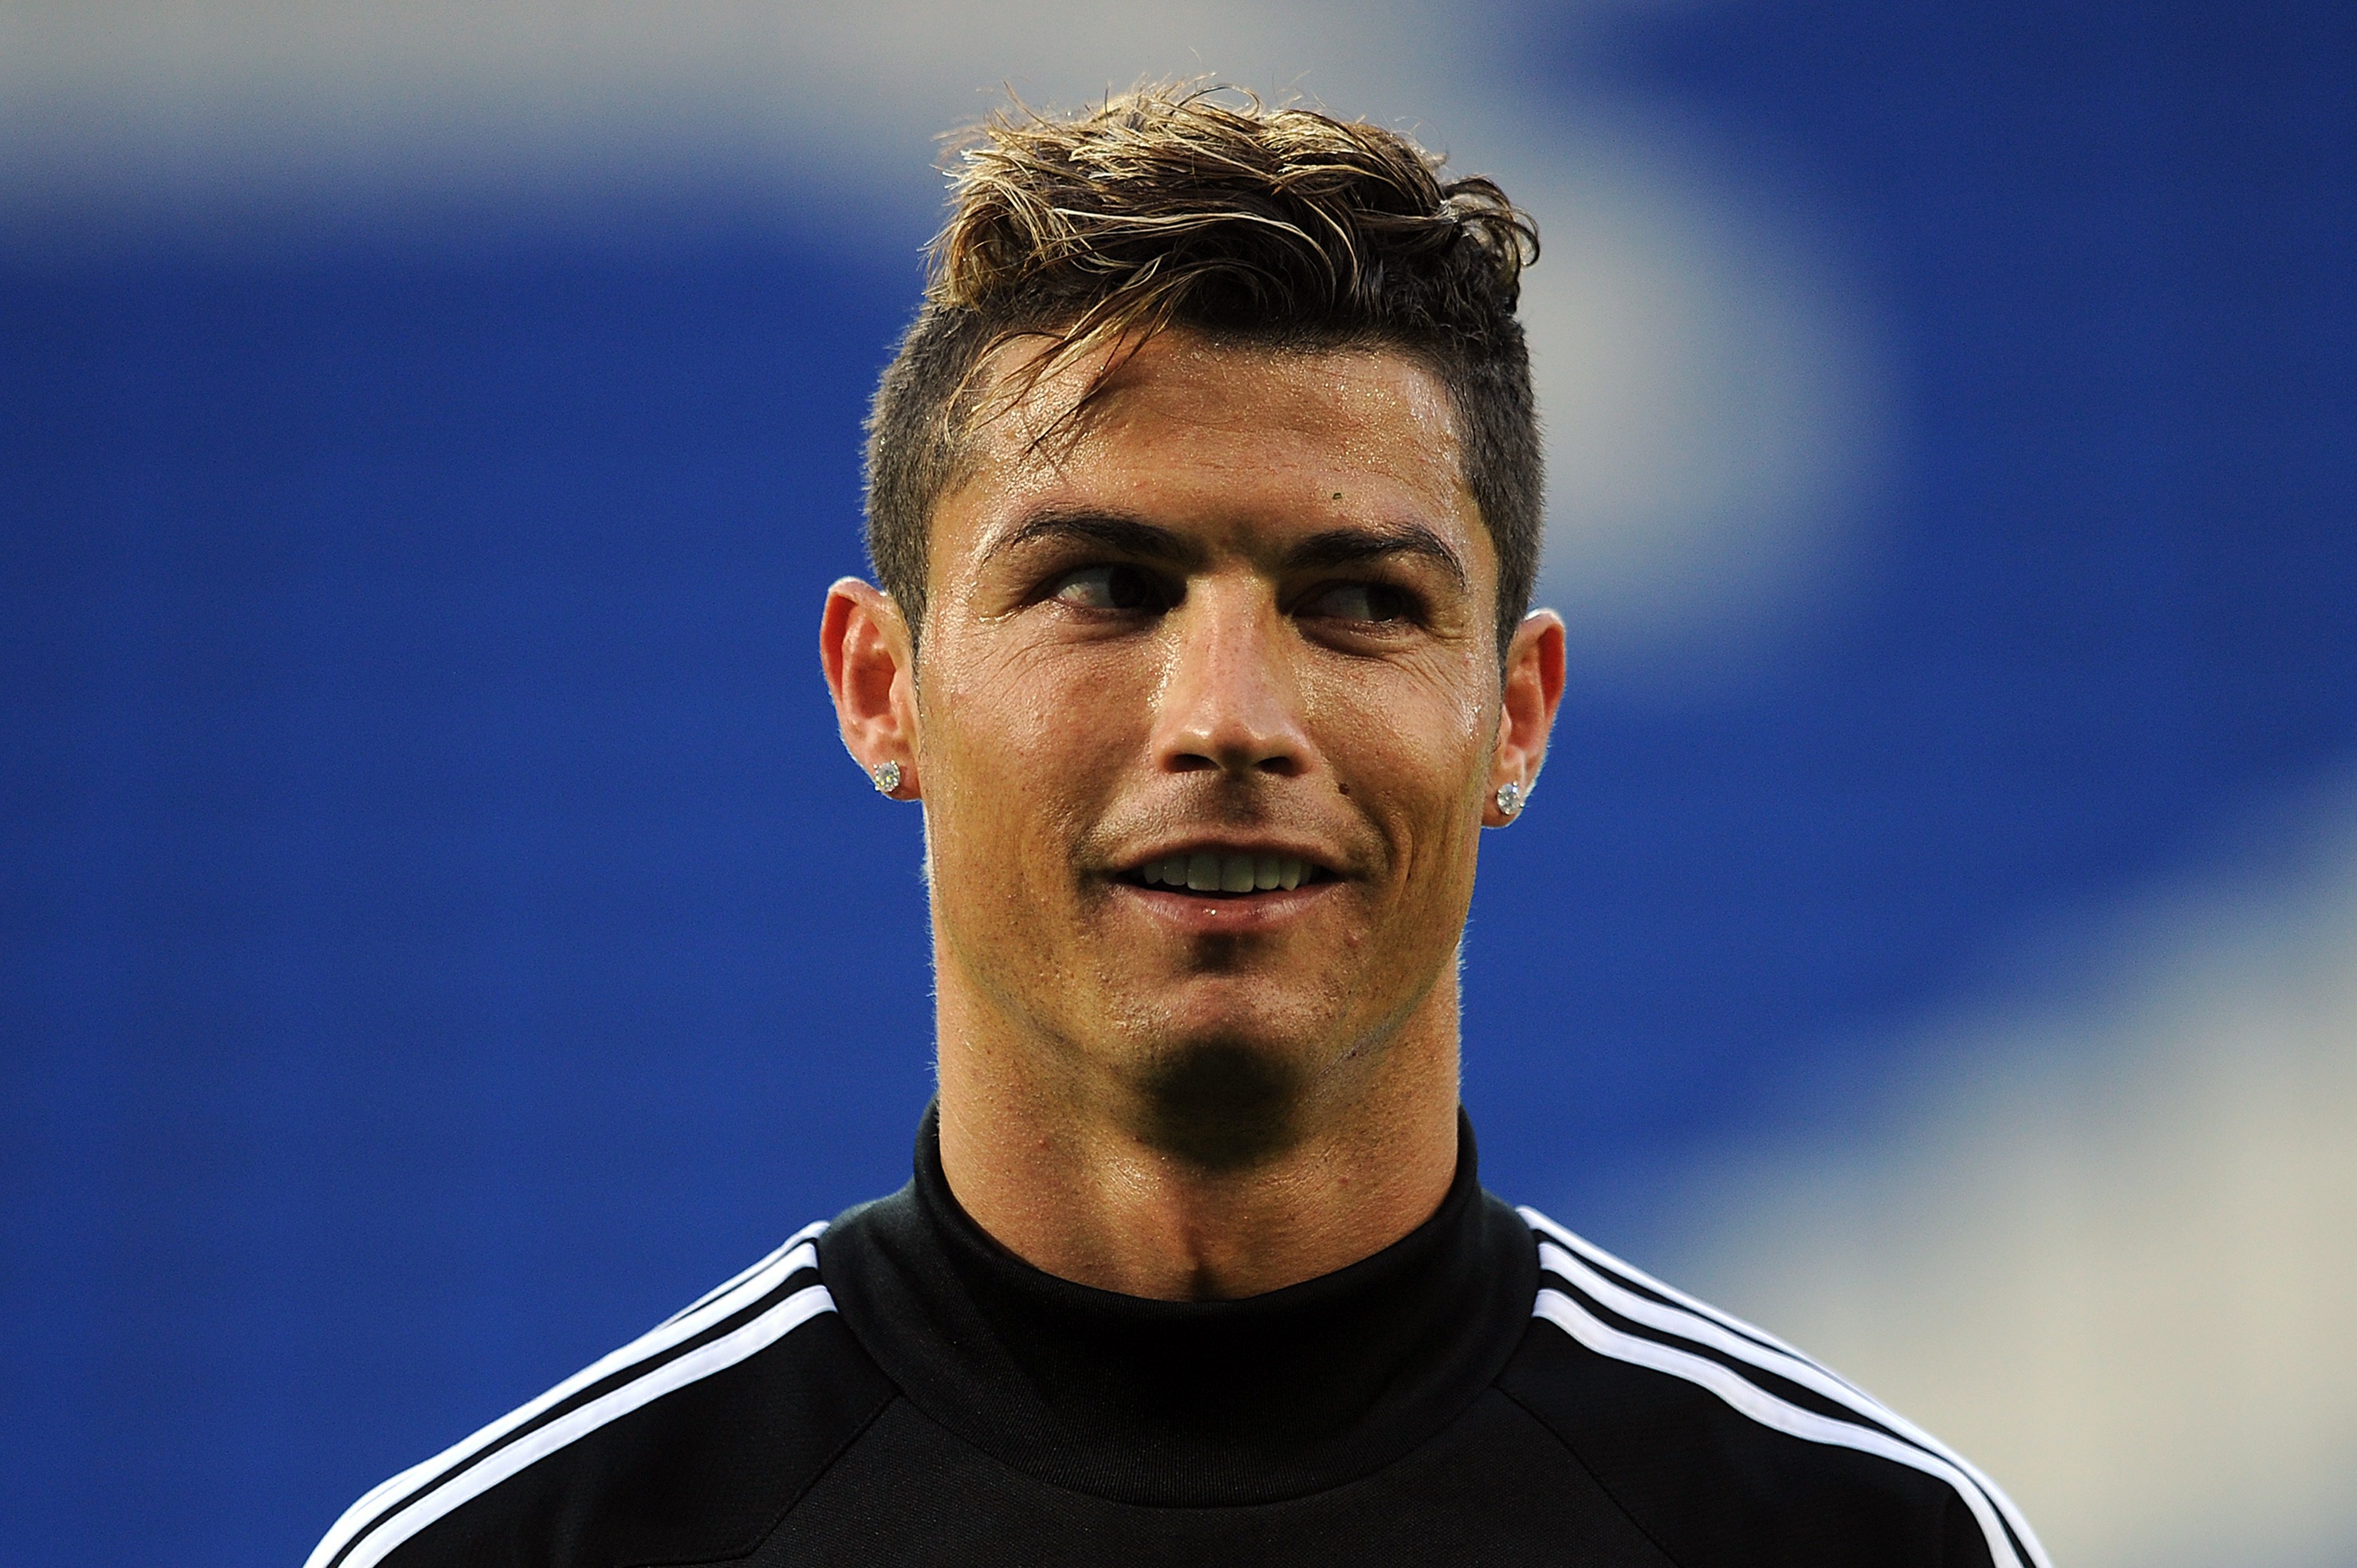 Cristiano Ronaldo of Real Madrid looks on during a training session ahead of the UEFA Super Cup at Cardiff City Stadium on Aug. 11, 2014 in Cardiff, Wales. (Chris Brunskill—Getty Images)